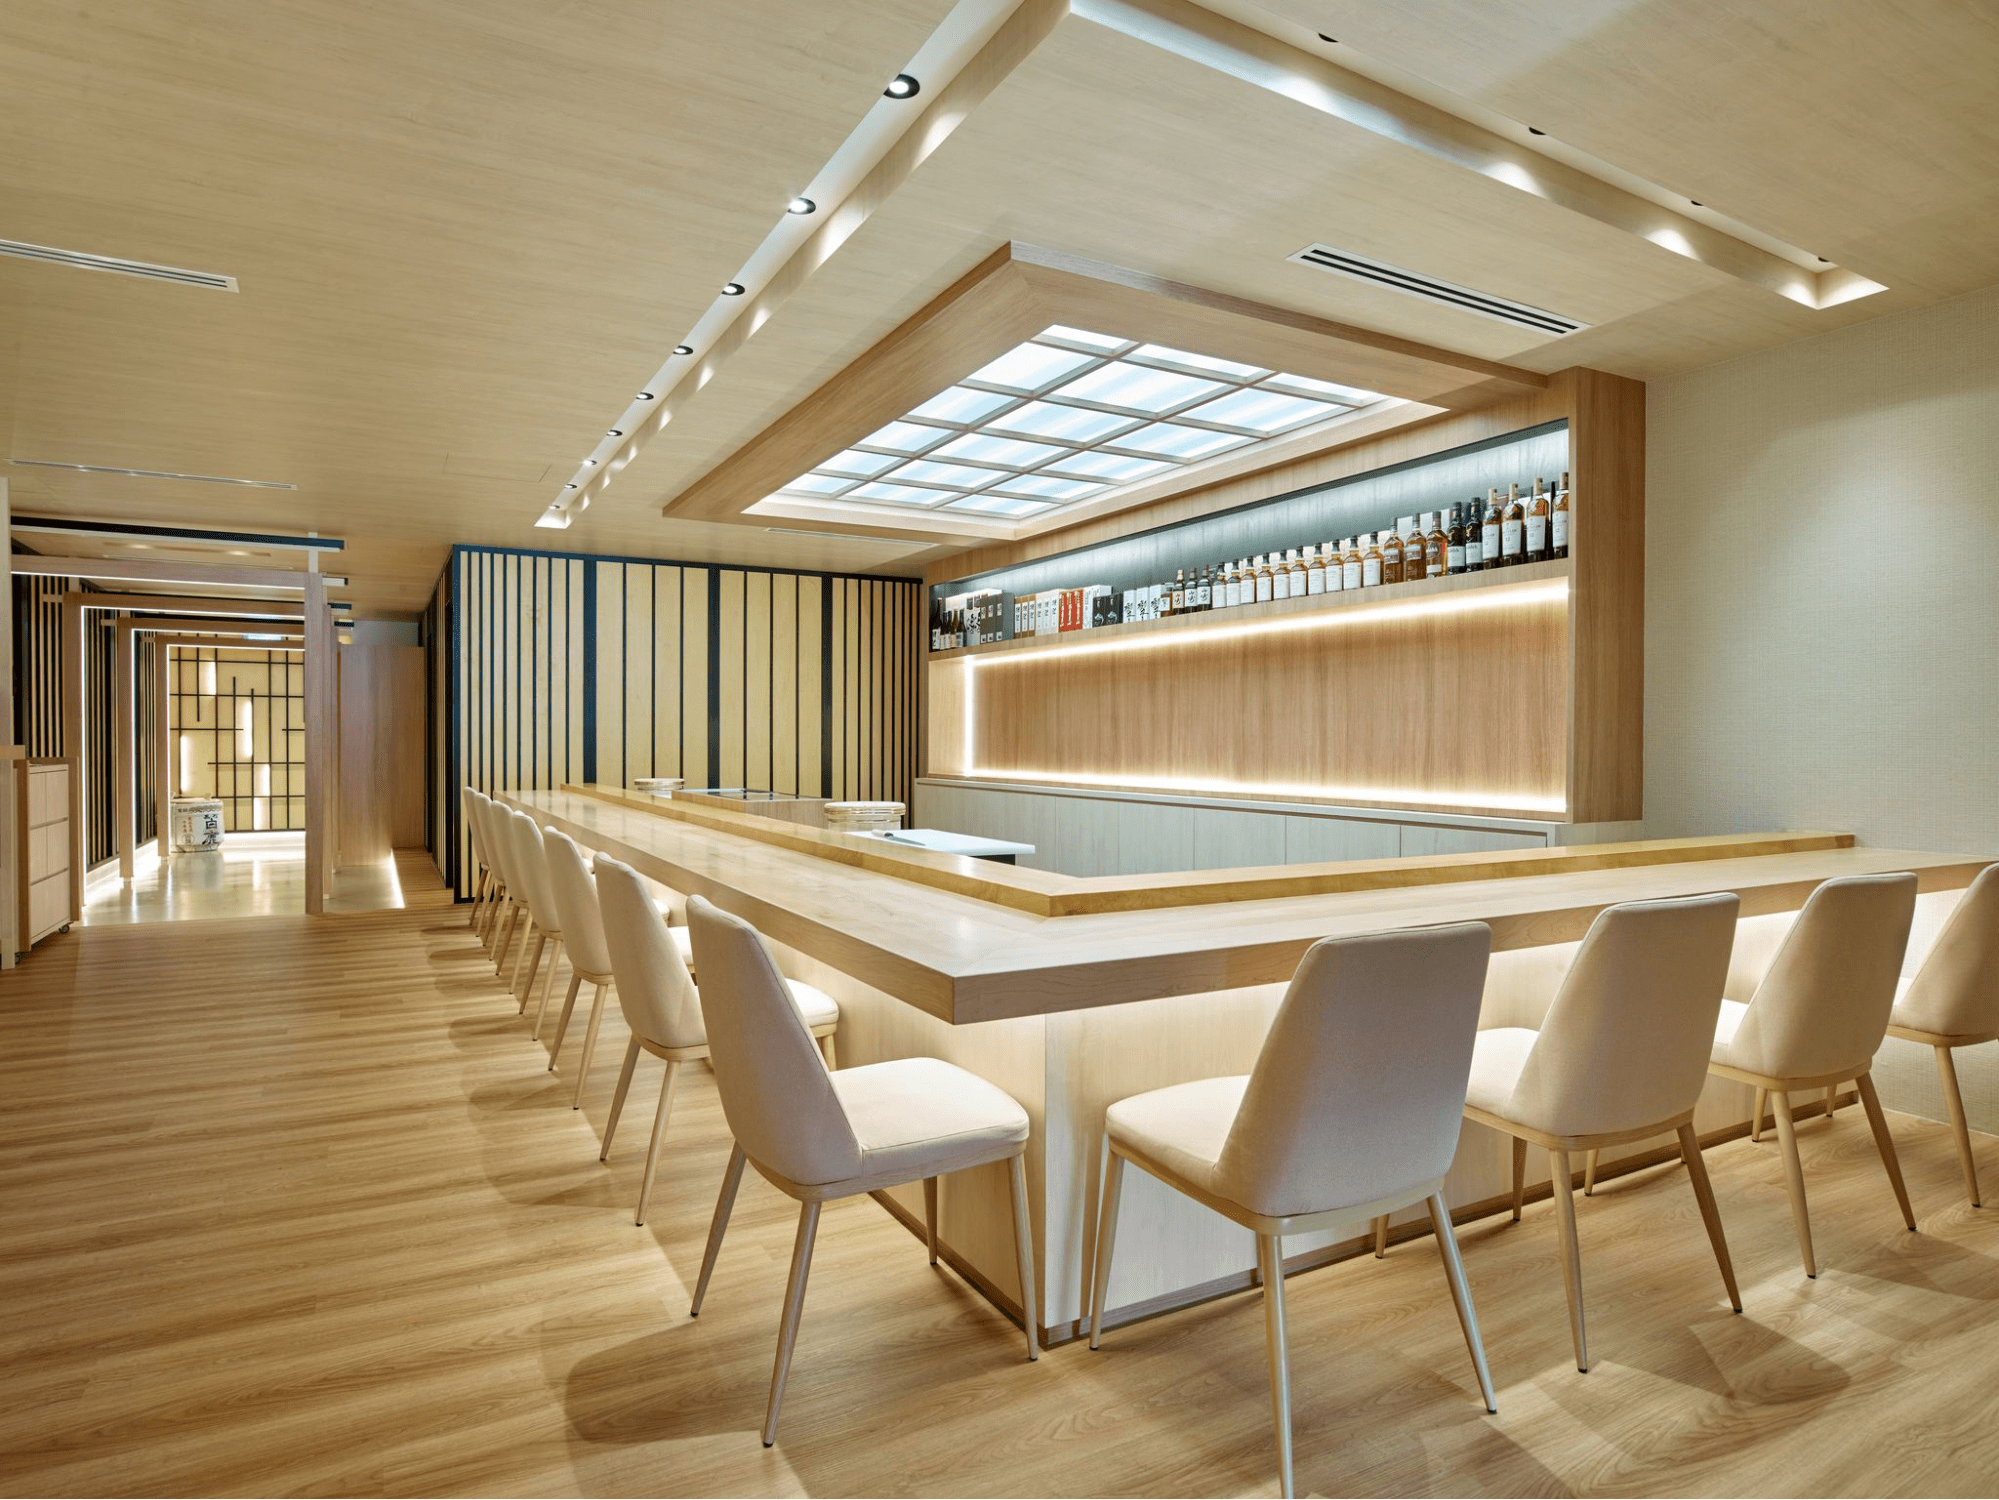 New cafes and restaurants in November - Ginza Shinto